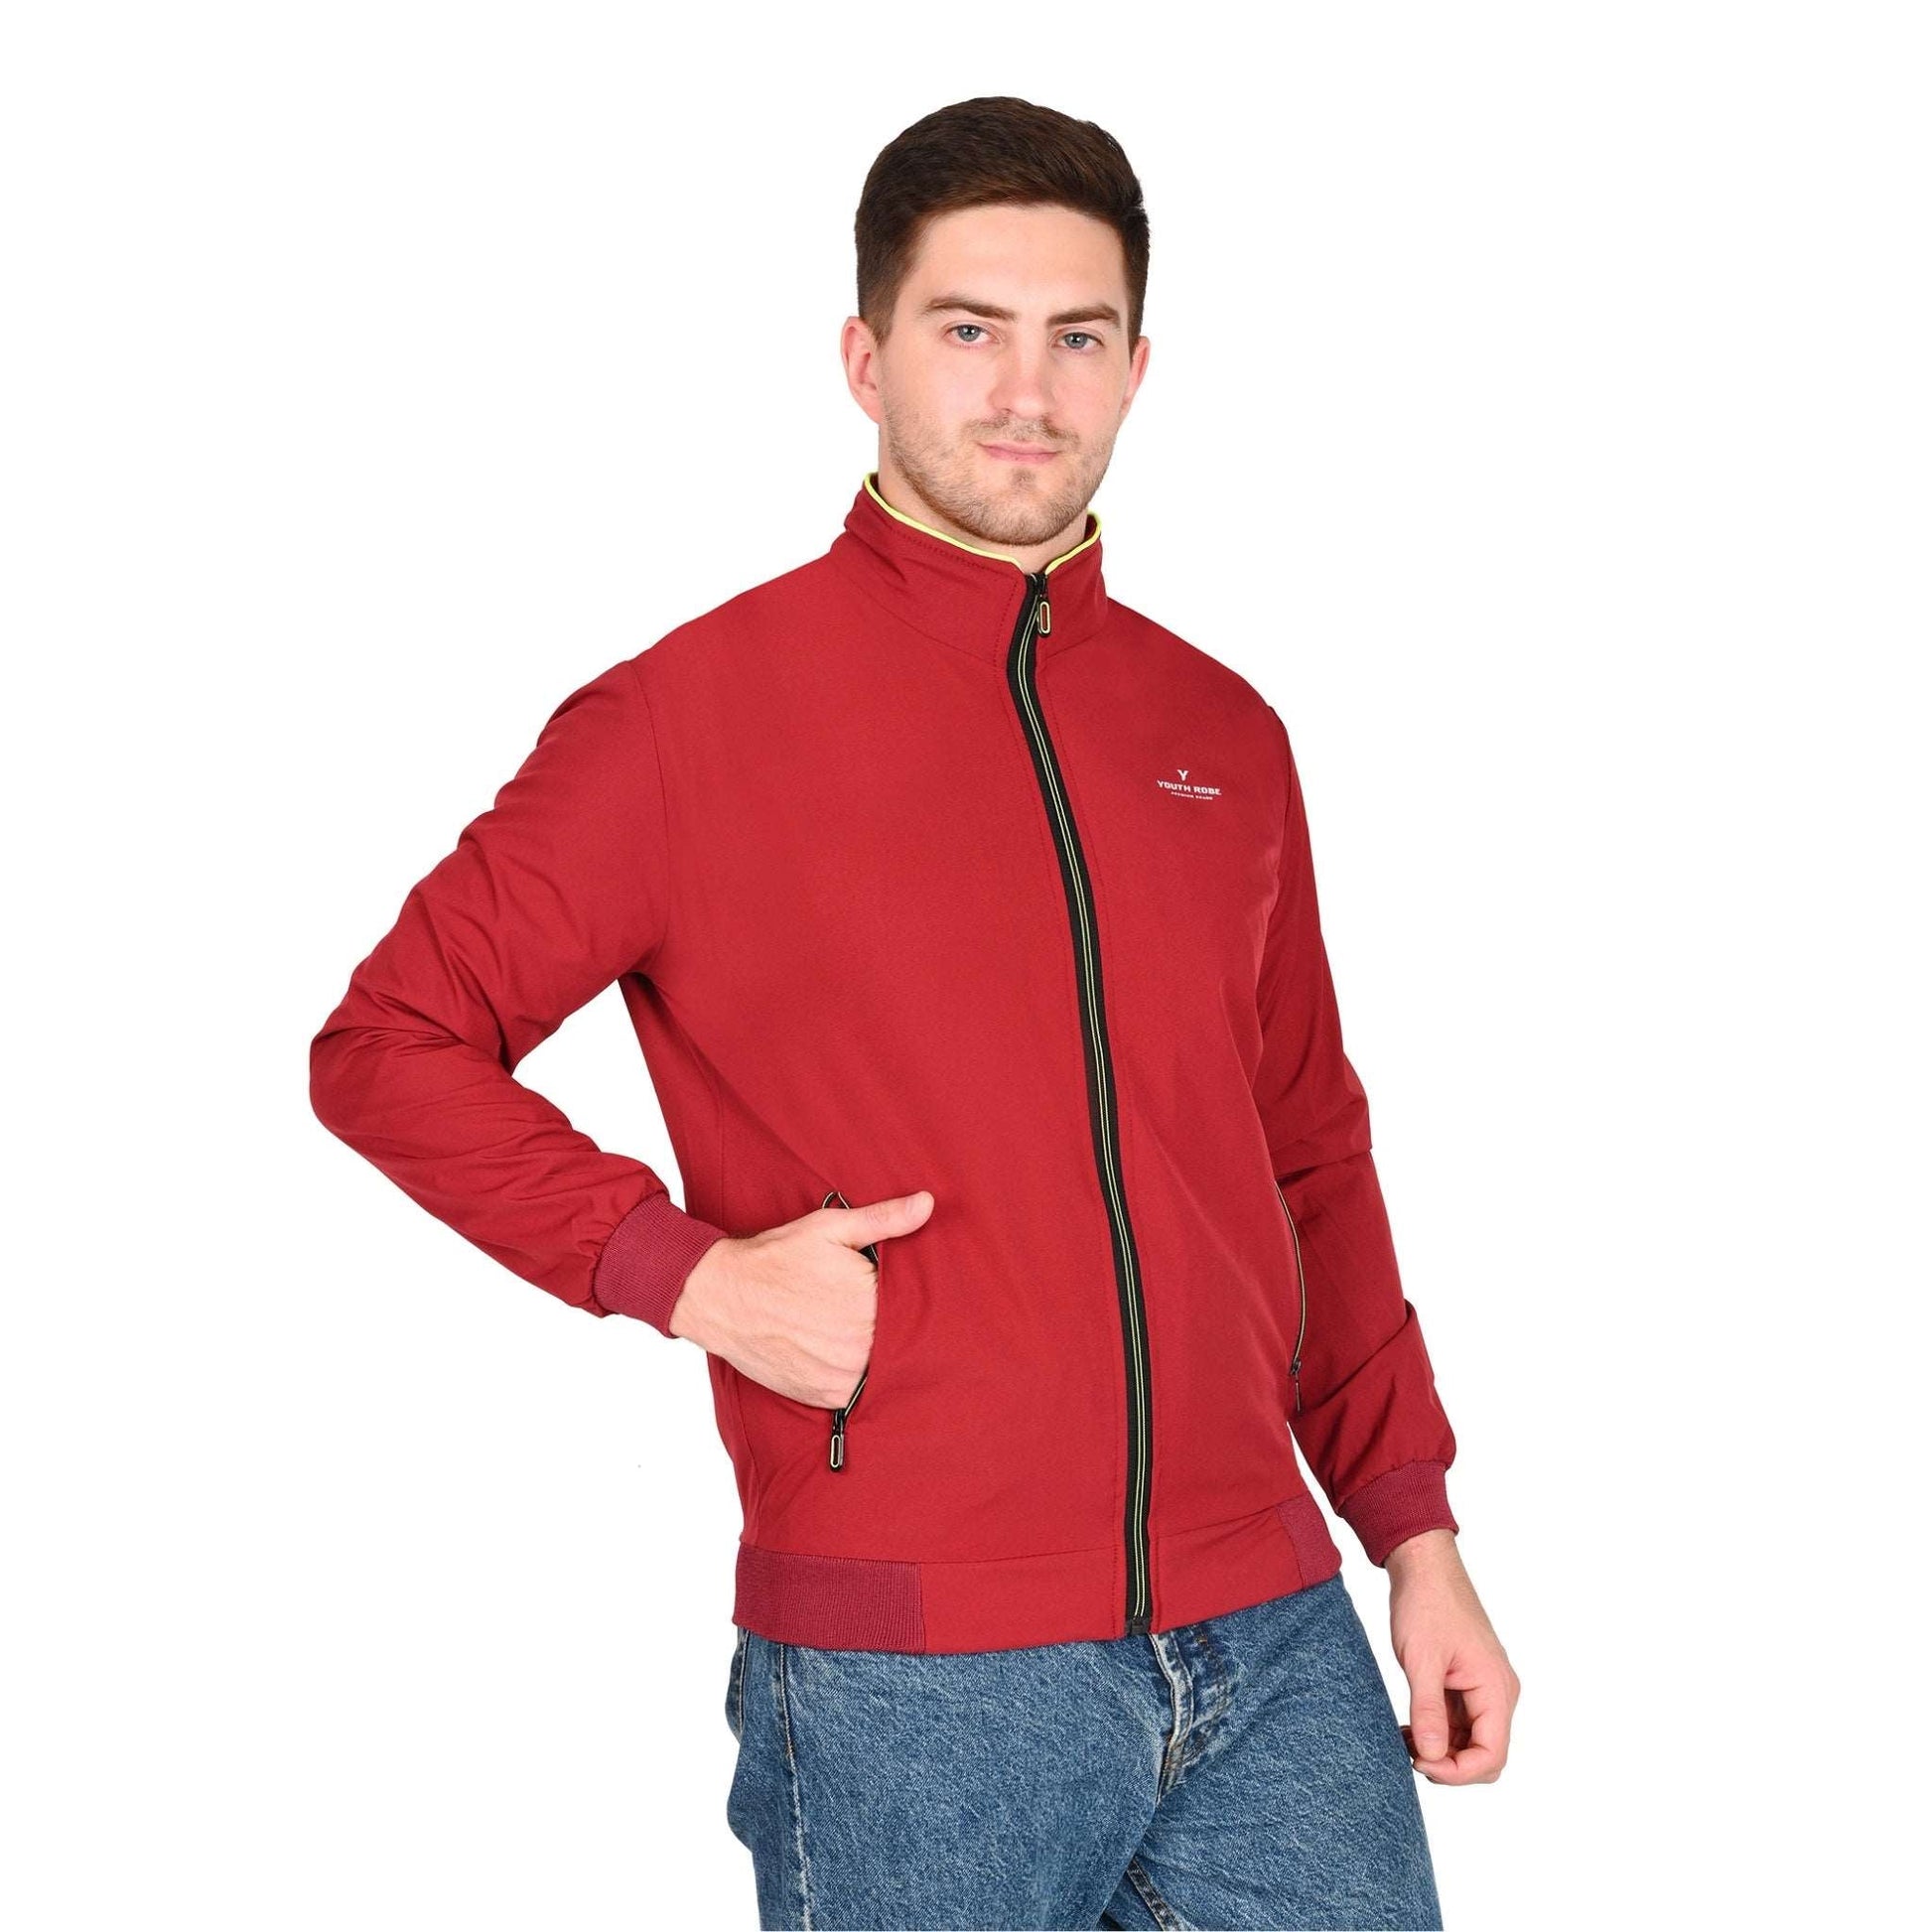 YOUTH ROBE's Honeycomb Jacket (Red) - YOUTH ROBE